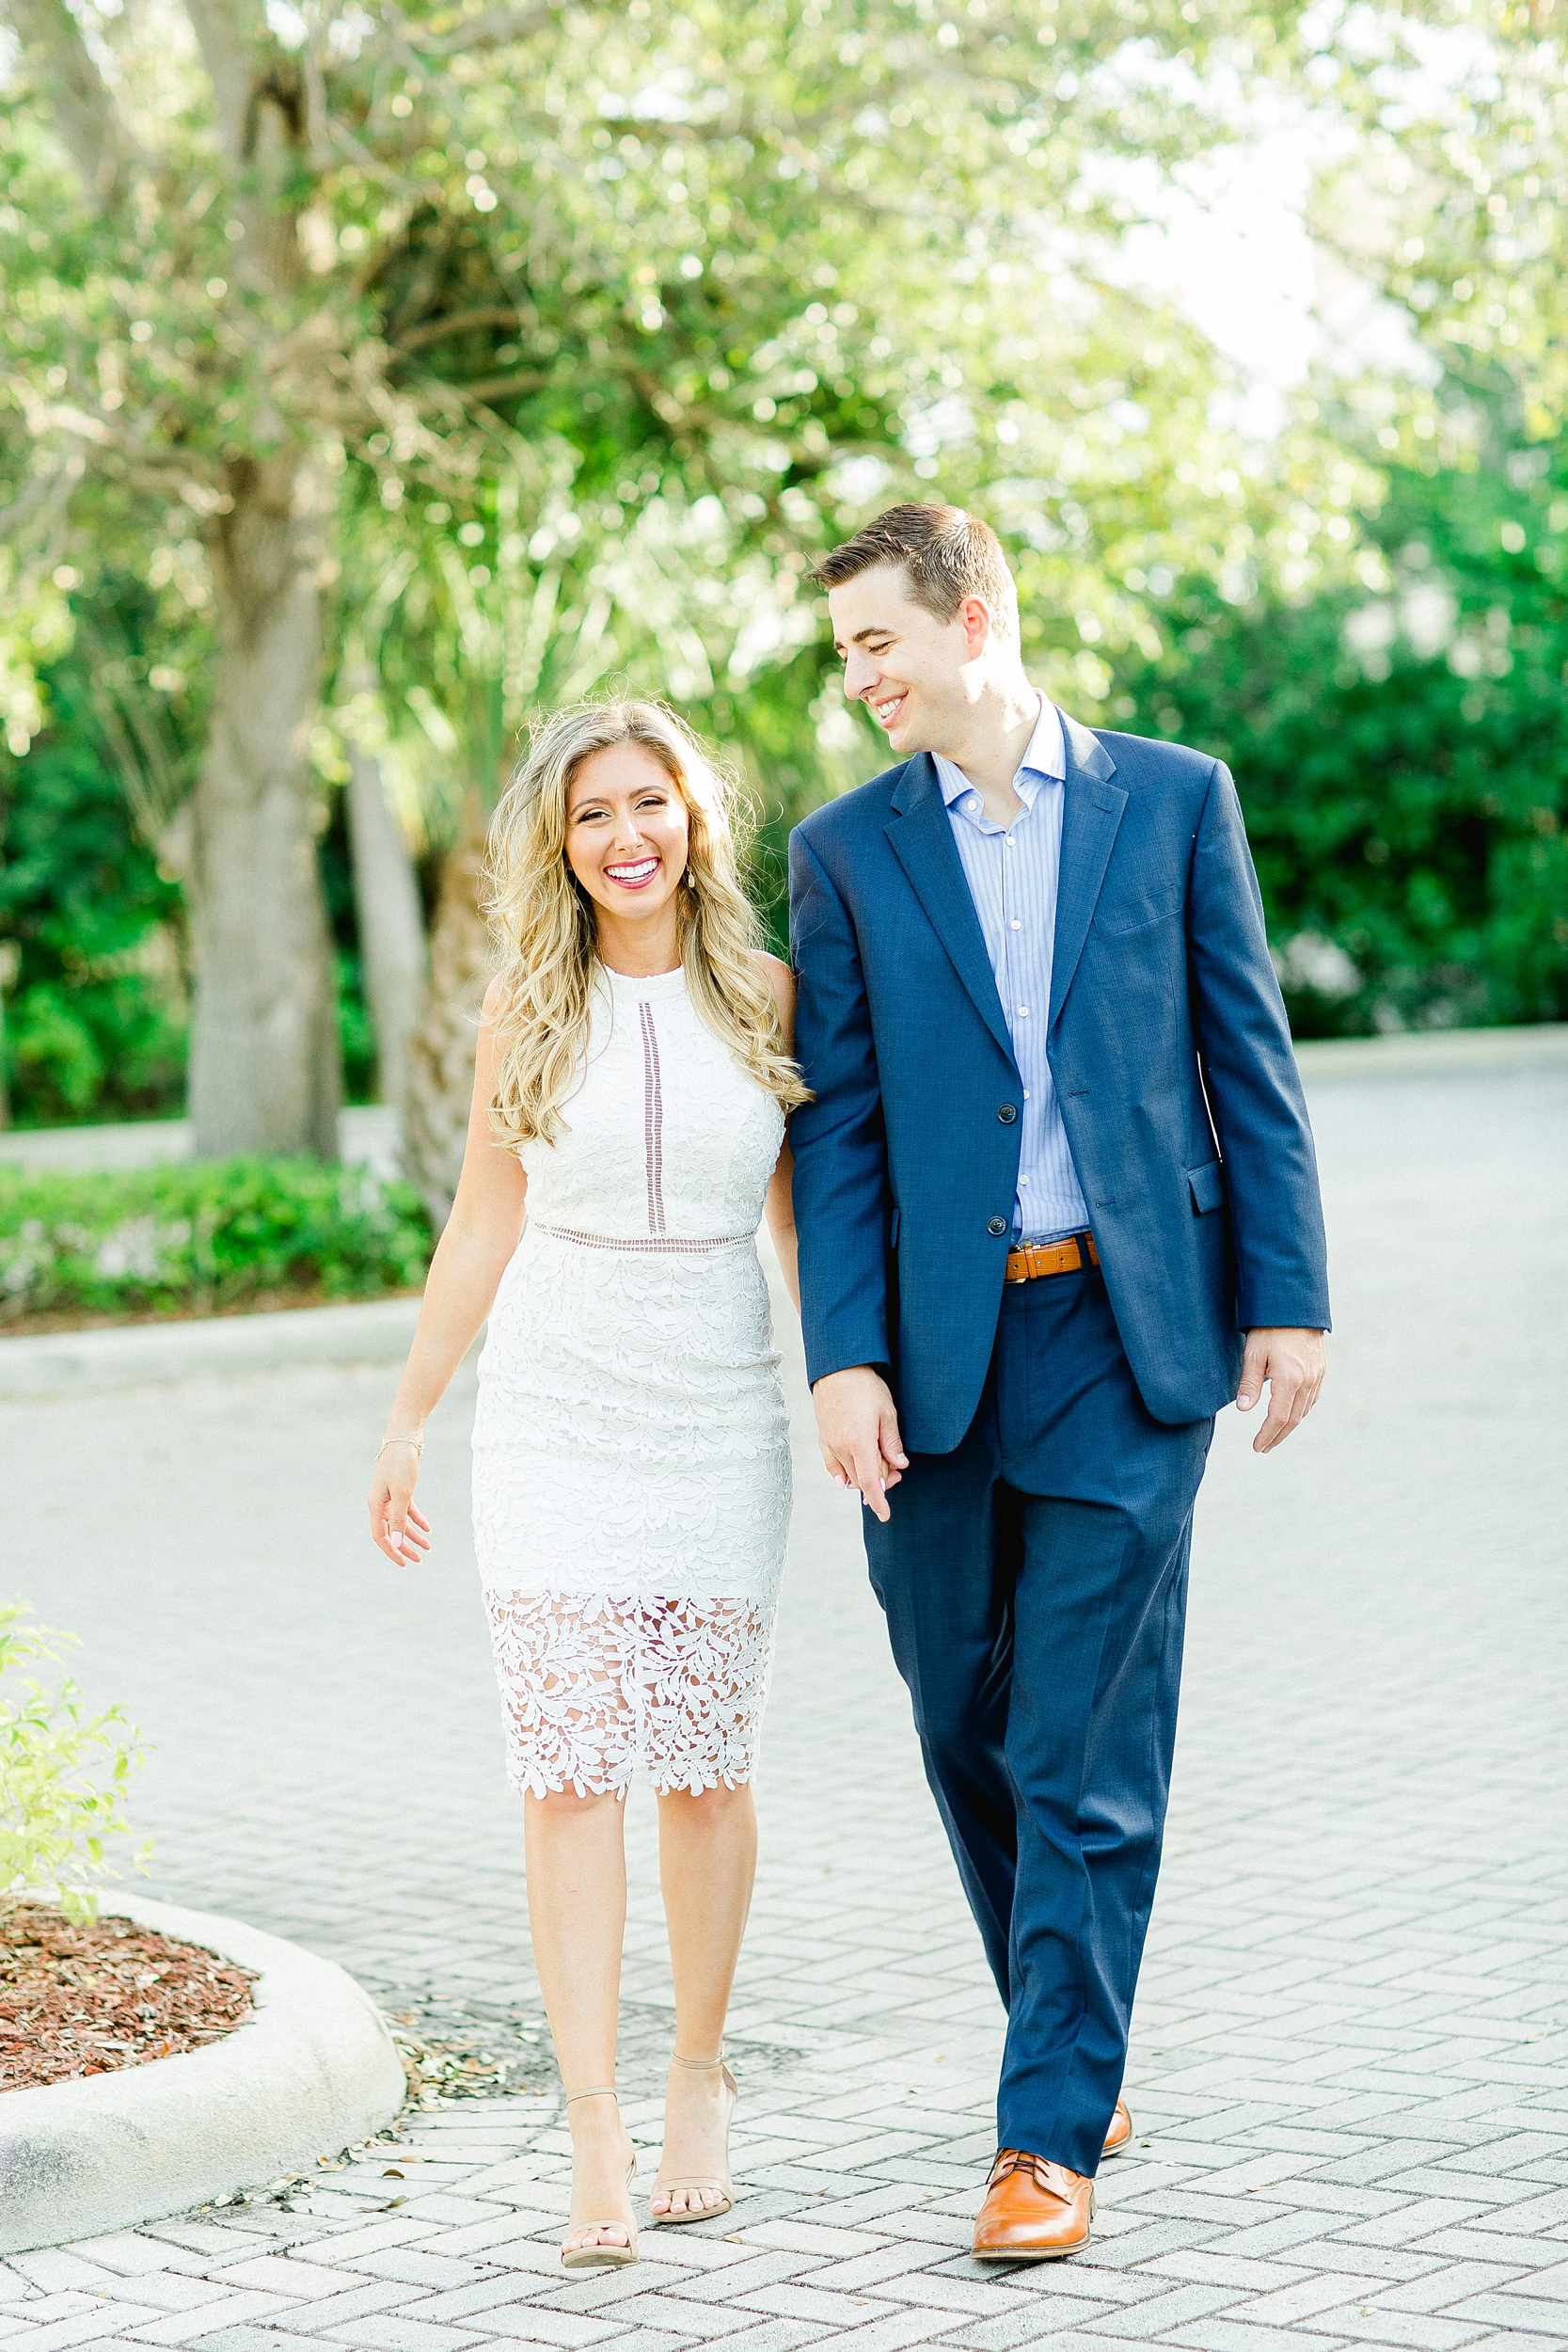 South Florida Engagement | © Ailyn La Torre Photography 2020